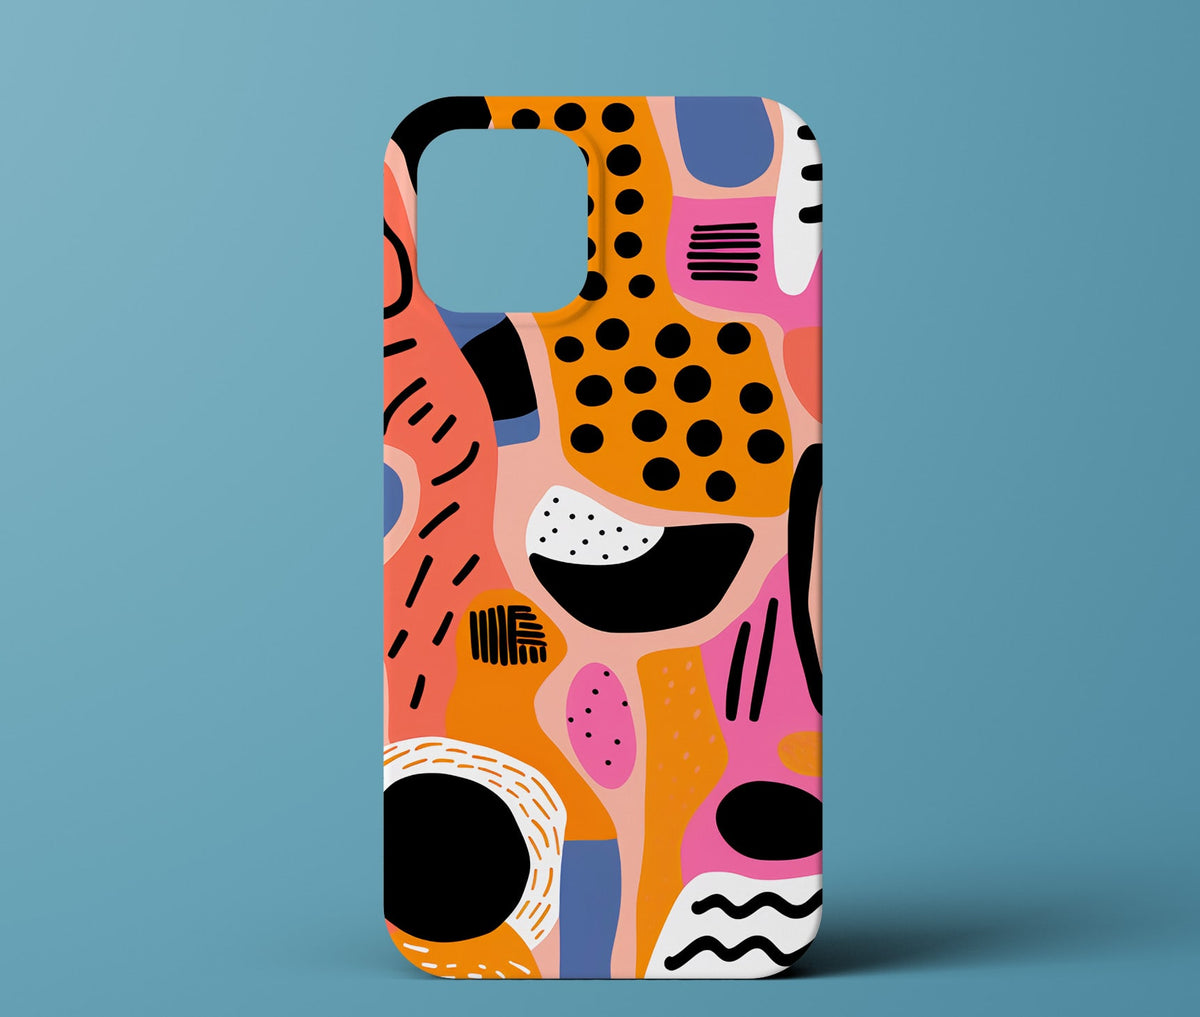 Colorful Abstract Art Phone Case